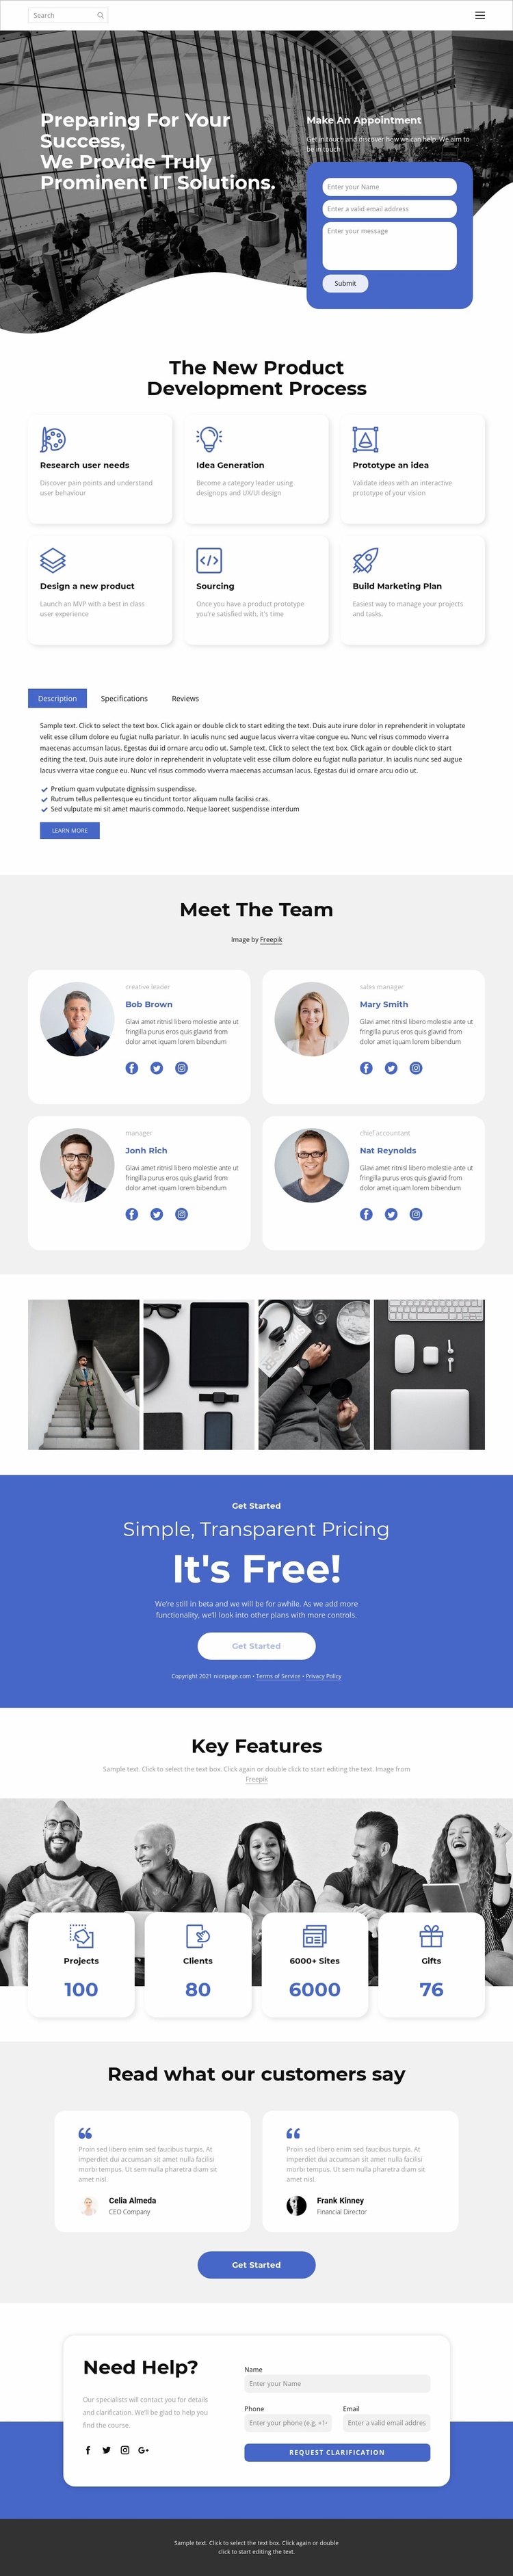 Quick help in problems Website Template